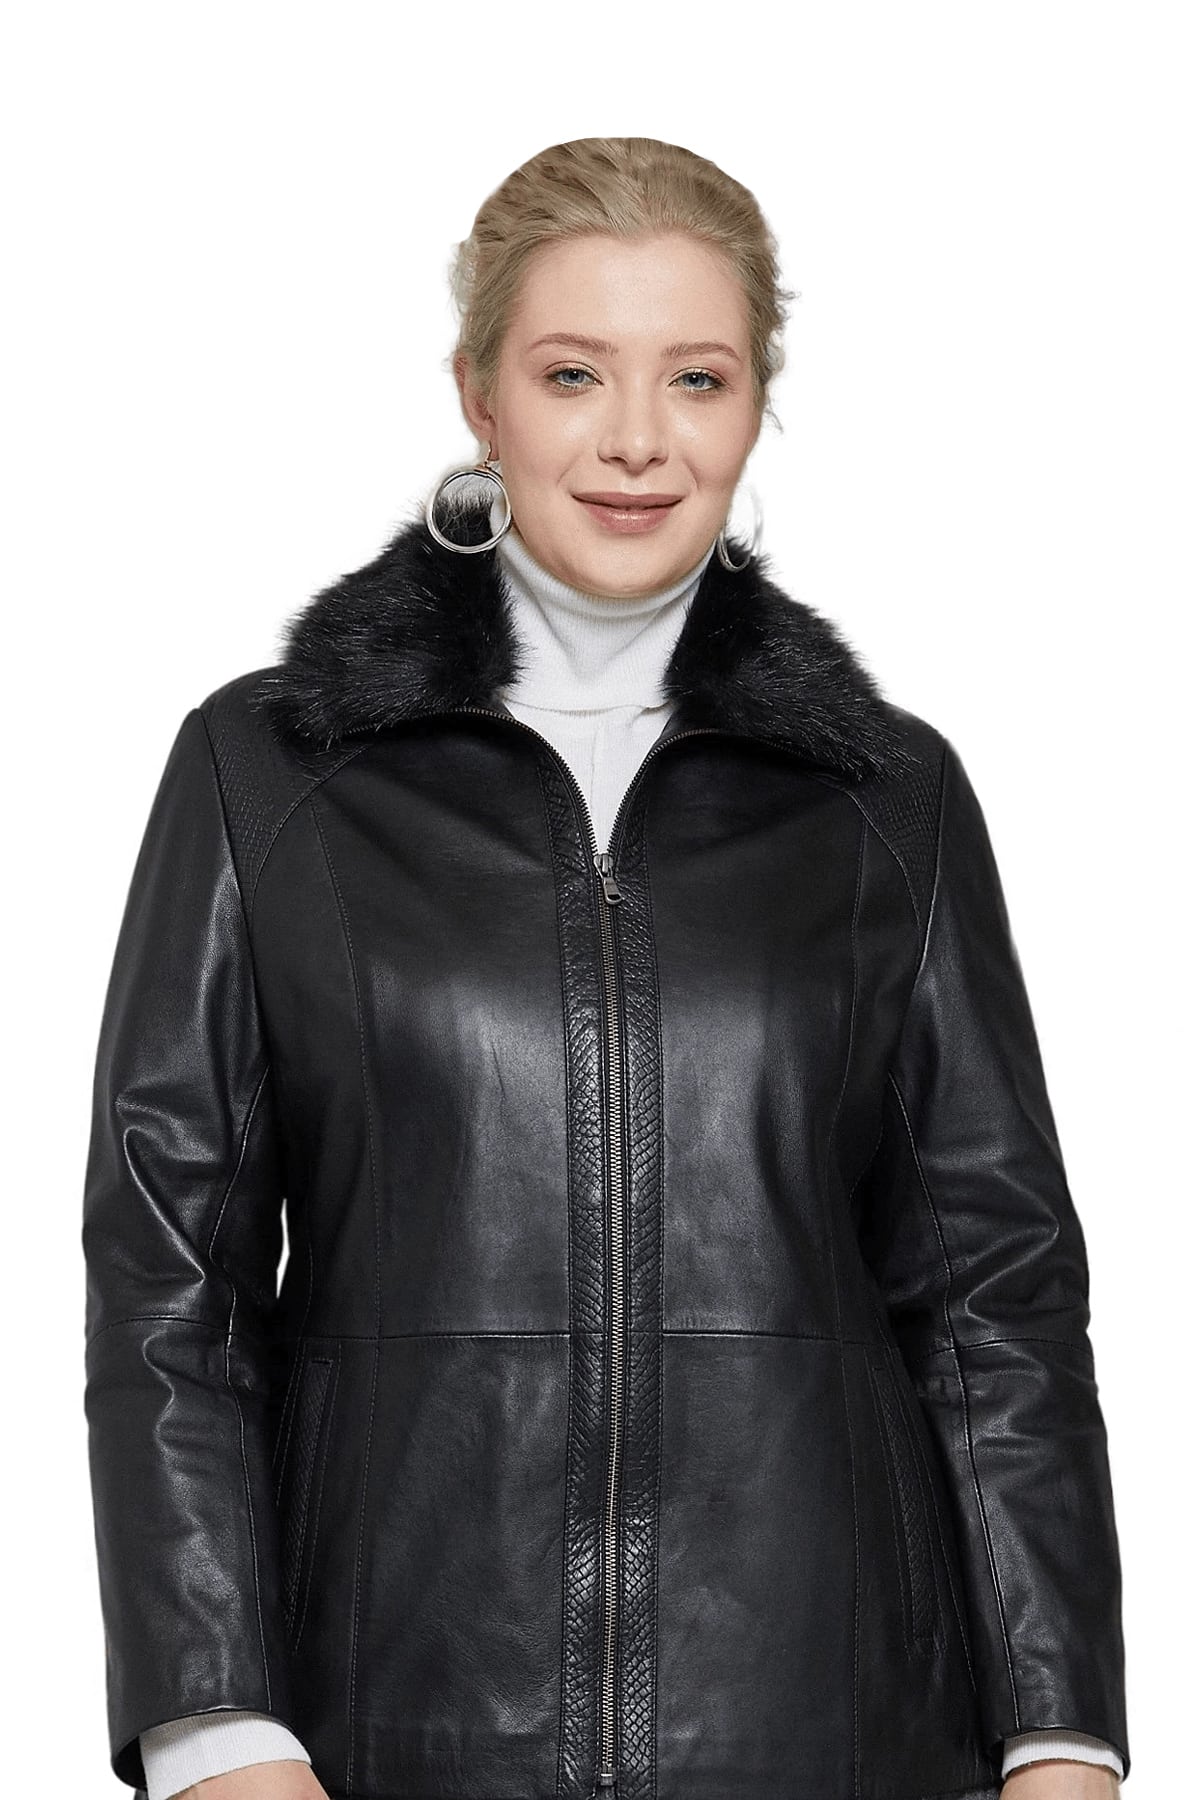 Women's 100 % Real Black Leather Classic Jacket